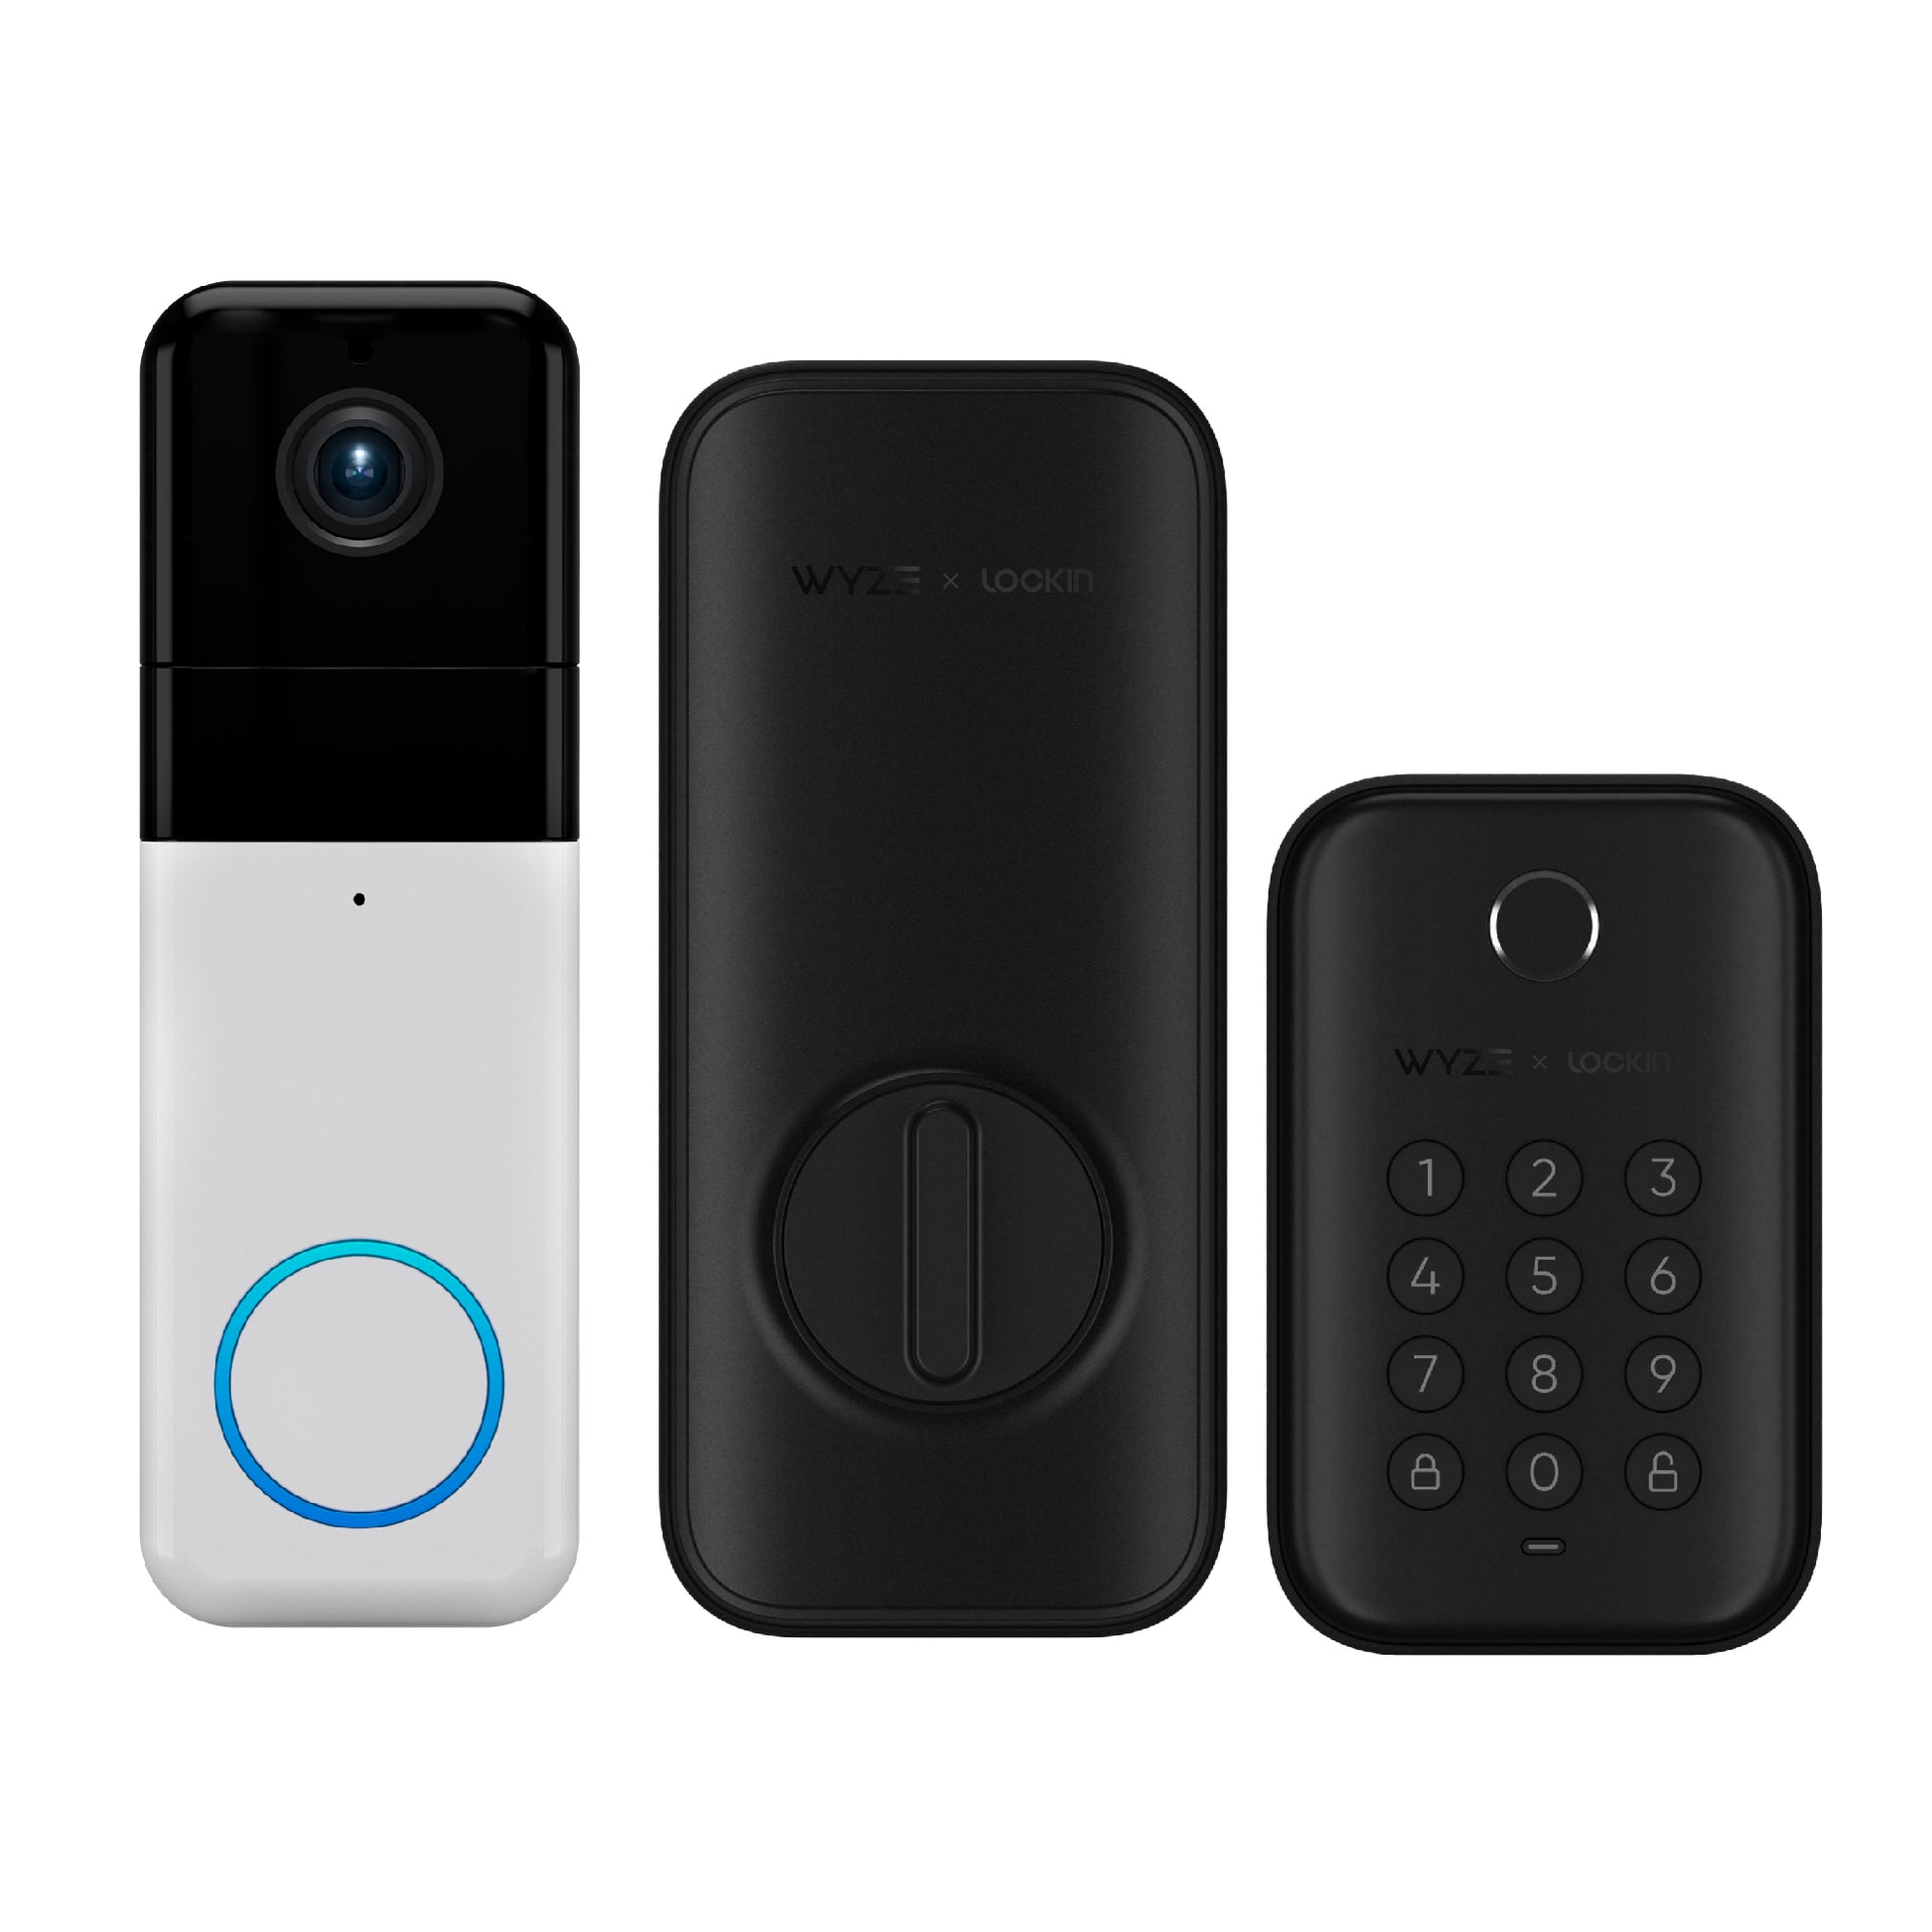 Wyze Video Doorbell Pro and Wyze Lock Bolt in Matte Black next to each other.